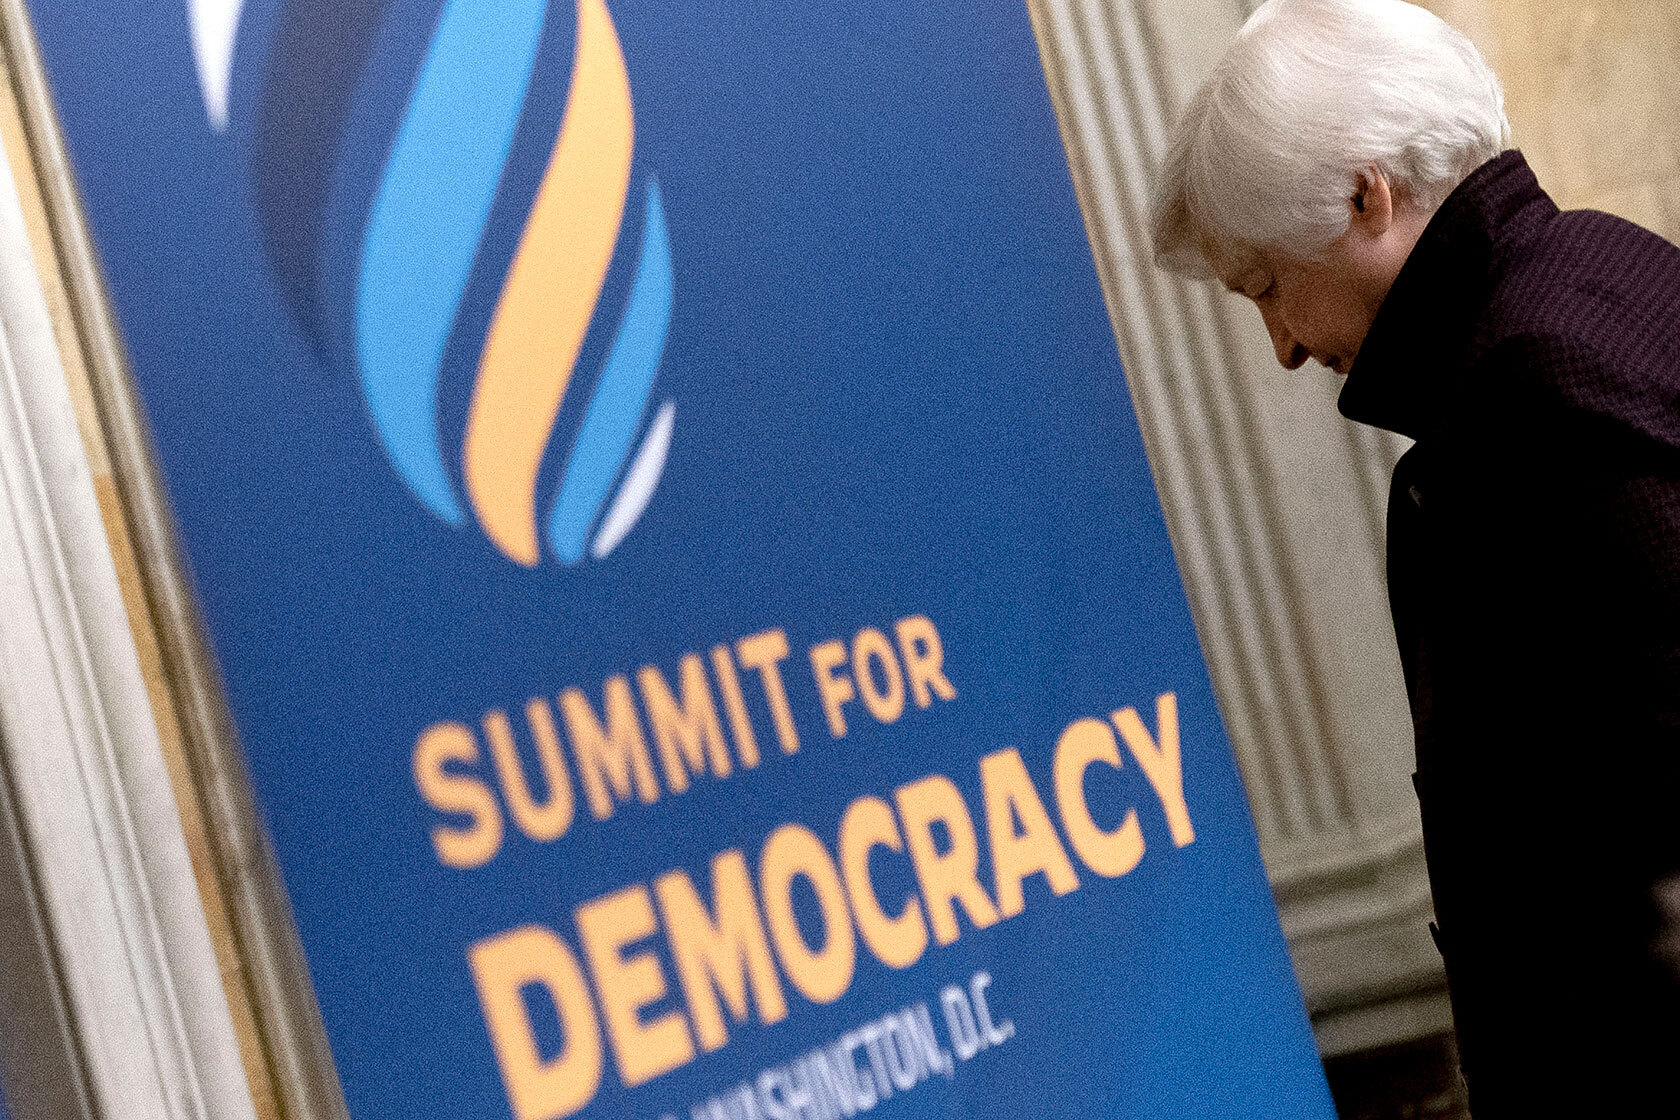 U.S. Treasury Secretary Janet Yellen departs after delivering the opening remarks for the 2023 Summit for Democracy.